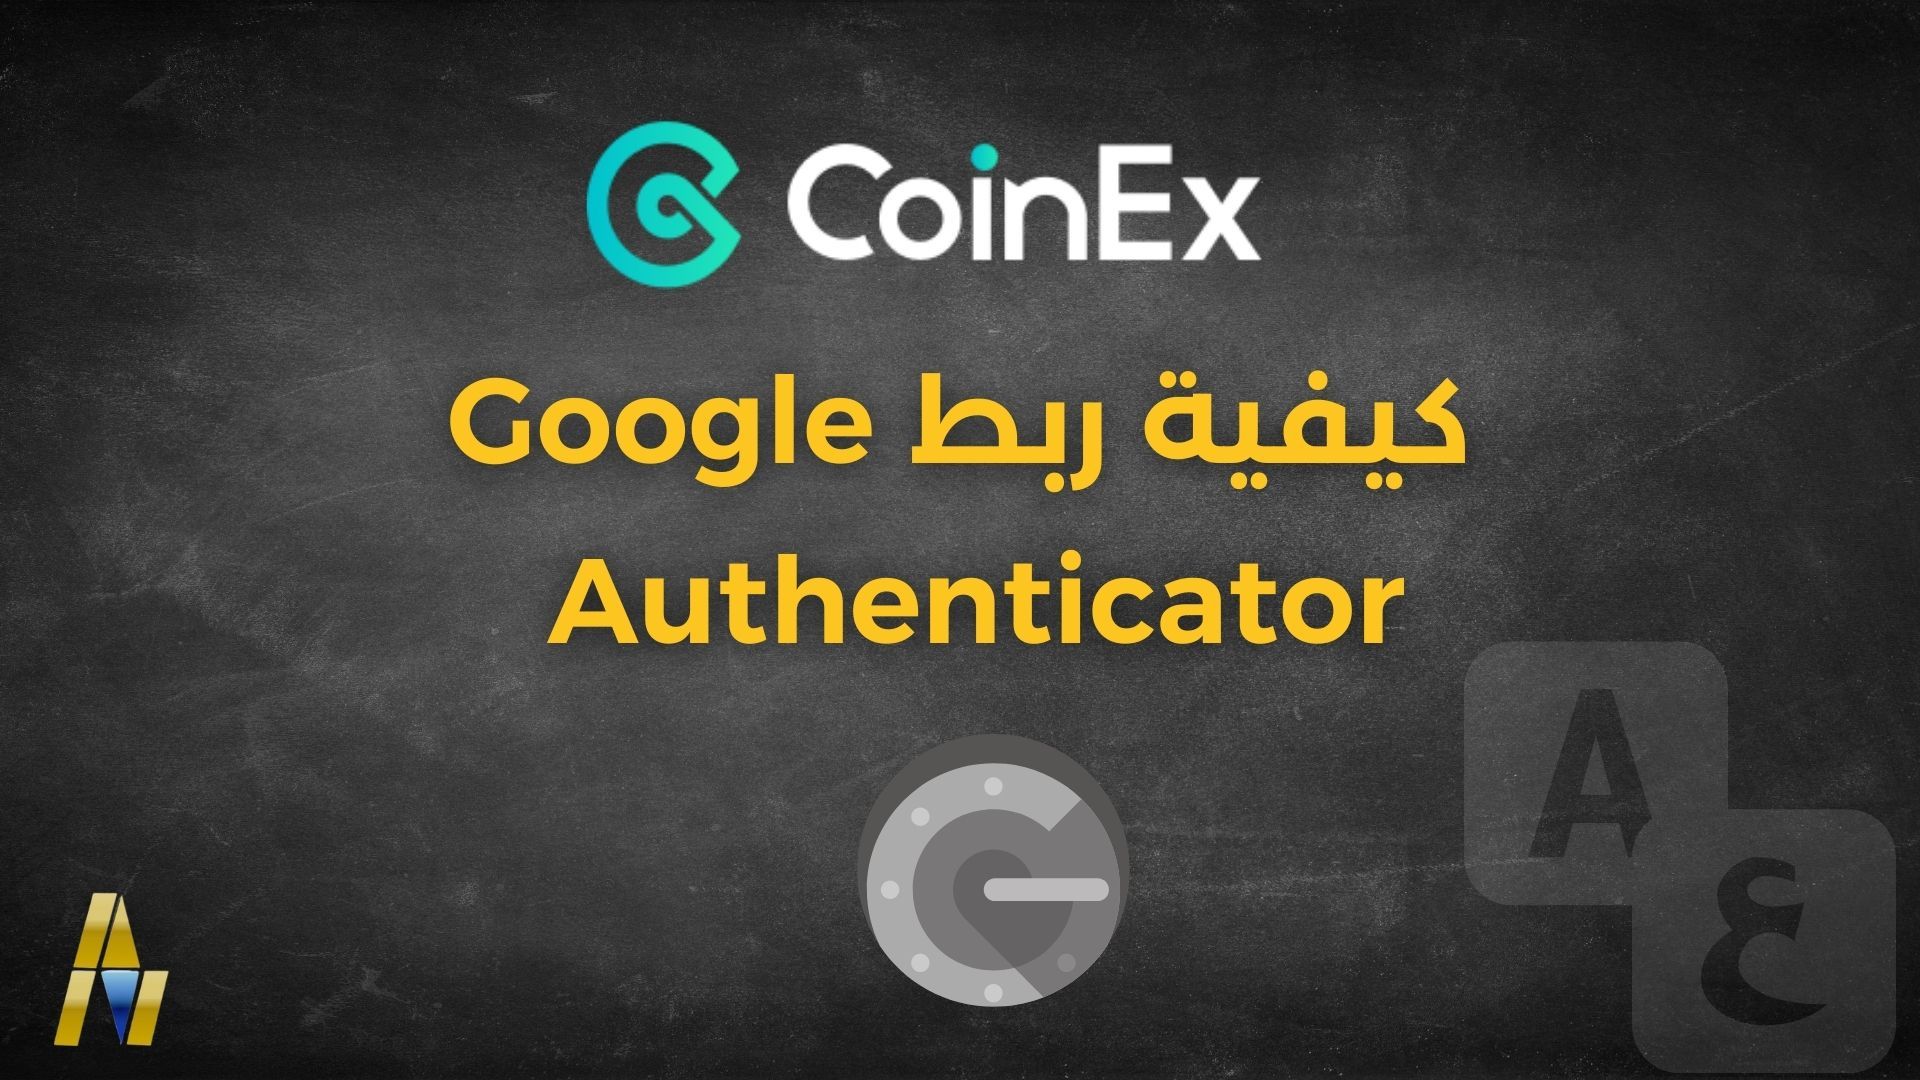 connect the Google Authenticator